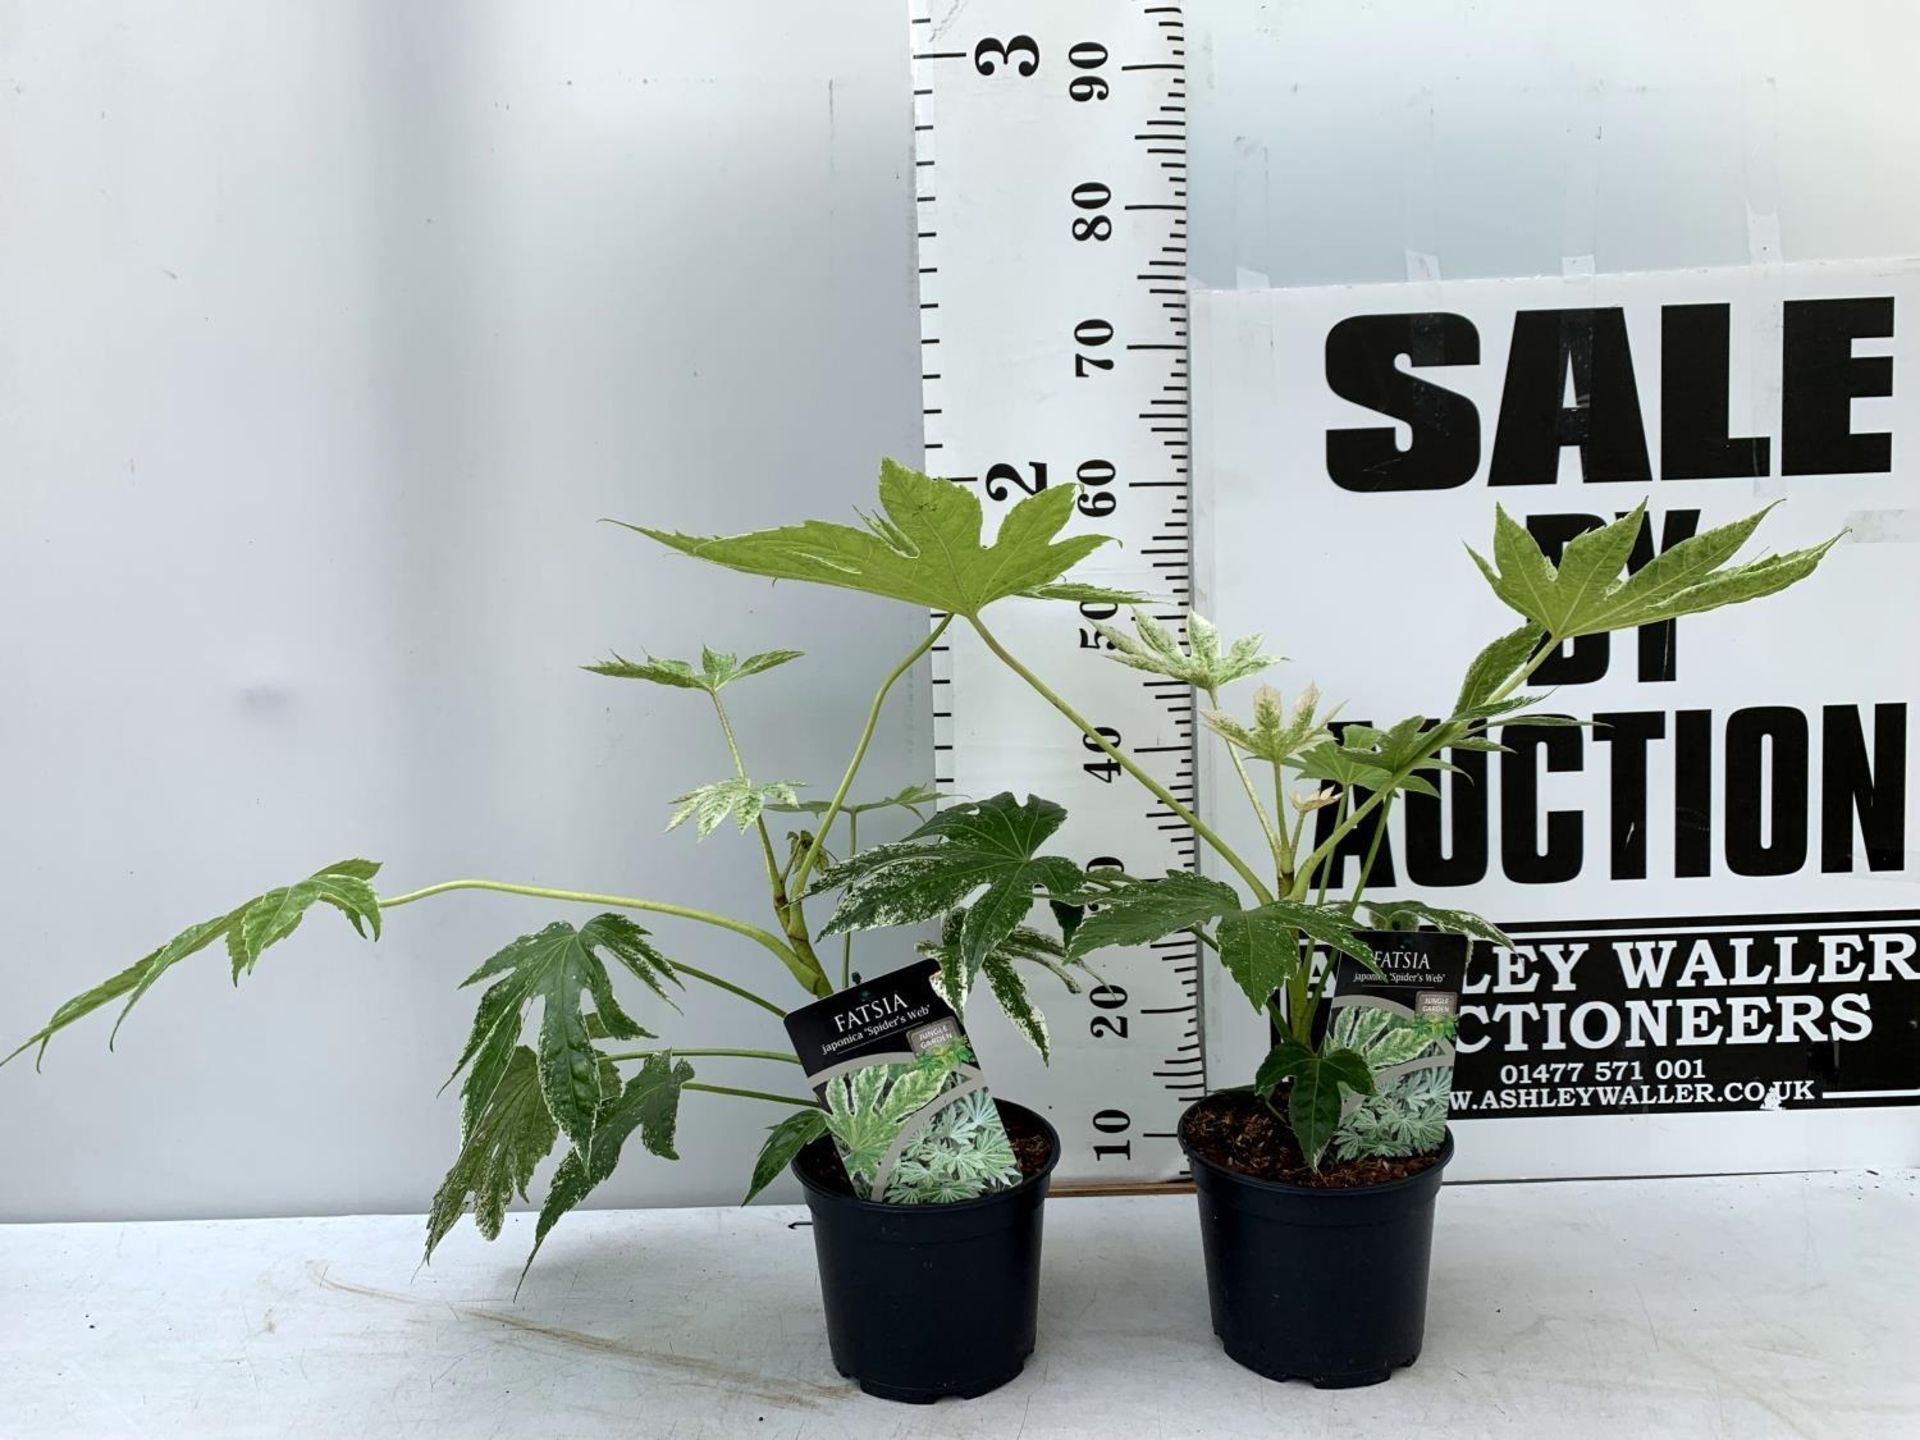 TWO FATSIA JAPONICA 'SPIDERS WEB' IN 2 LTR POTS 60CM TALL PLUS VAT TO BE SOLD FOR THE TWO - Image 2 of 8